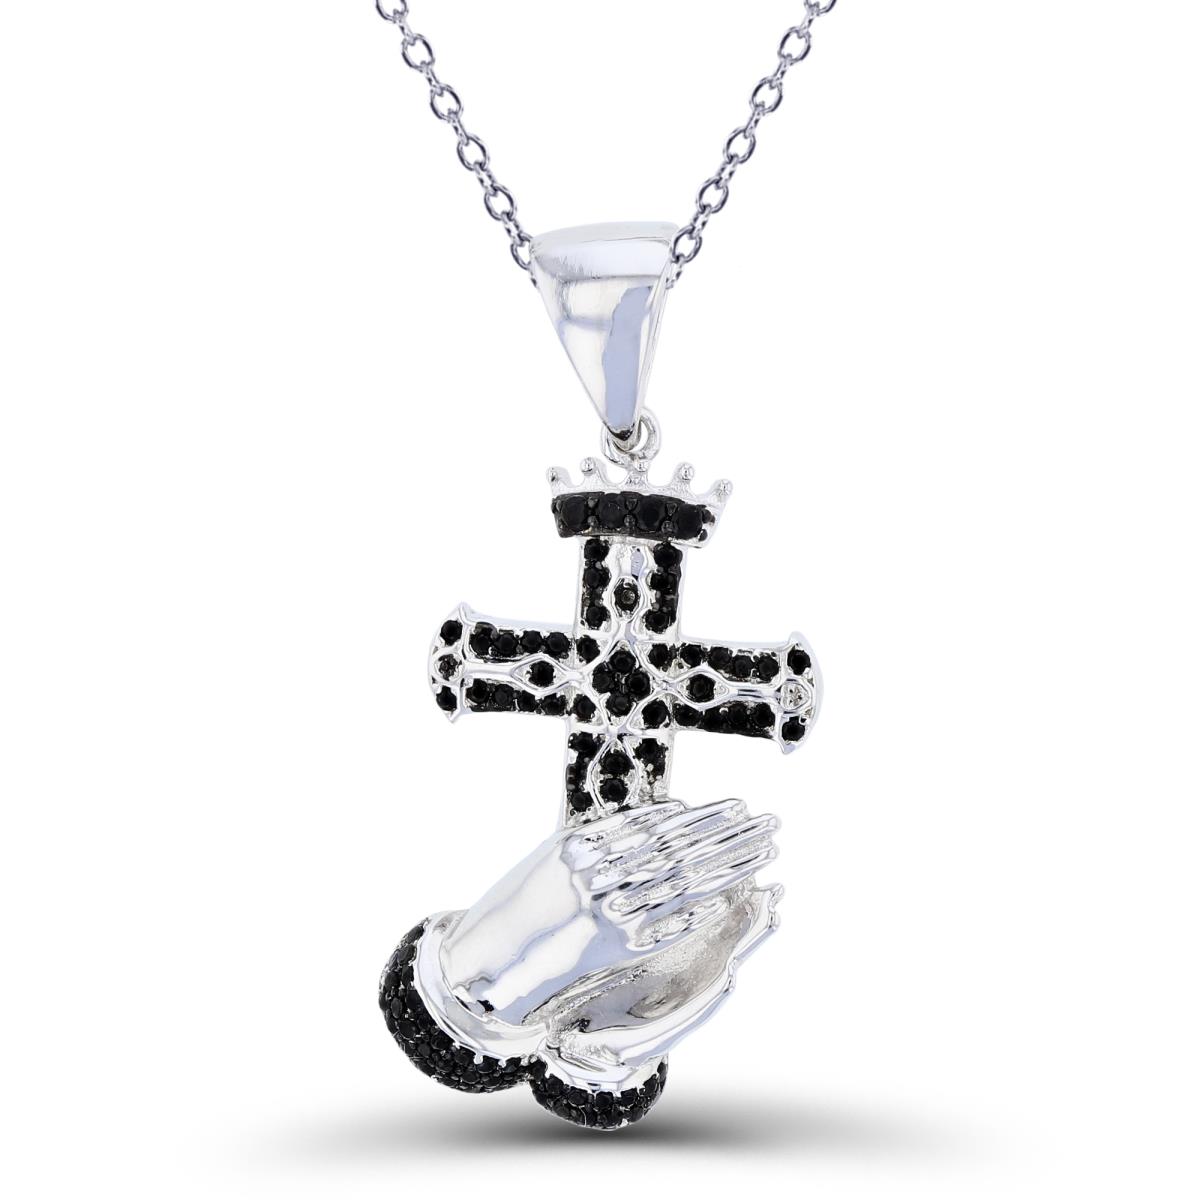 Sterling Silver Two-Tone (B/W) High Polish & Textured Rnd Black Spinel Praying Hands with Cross 18"Necklace